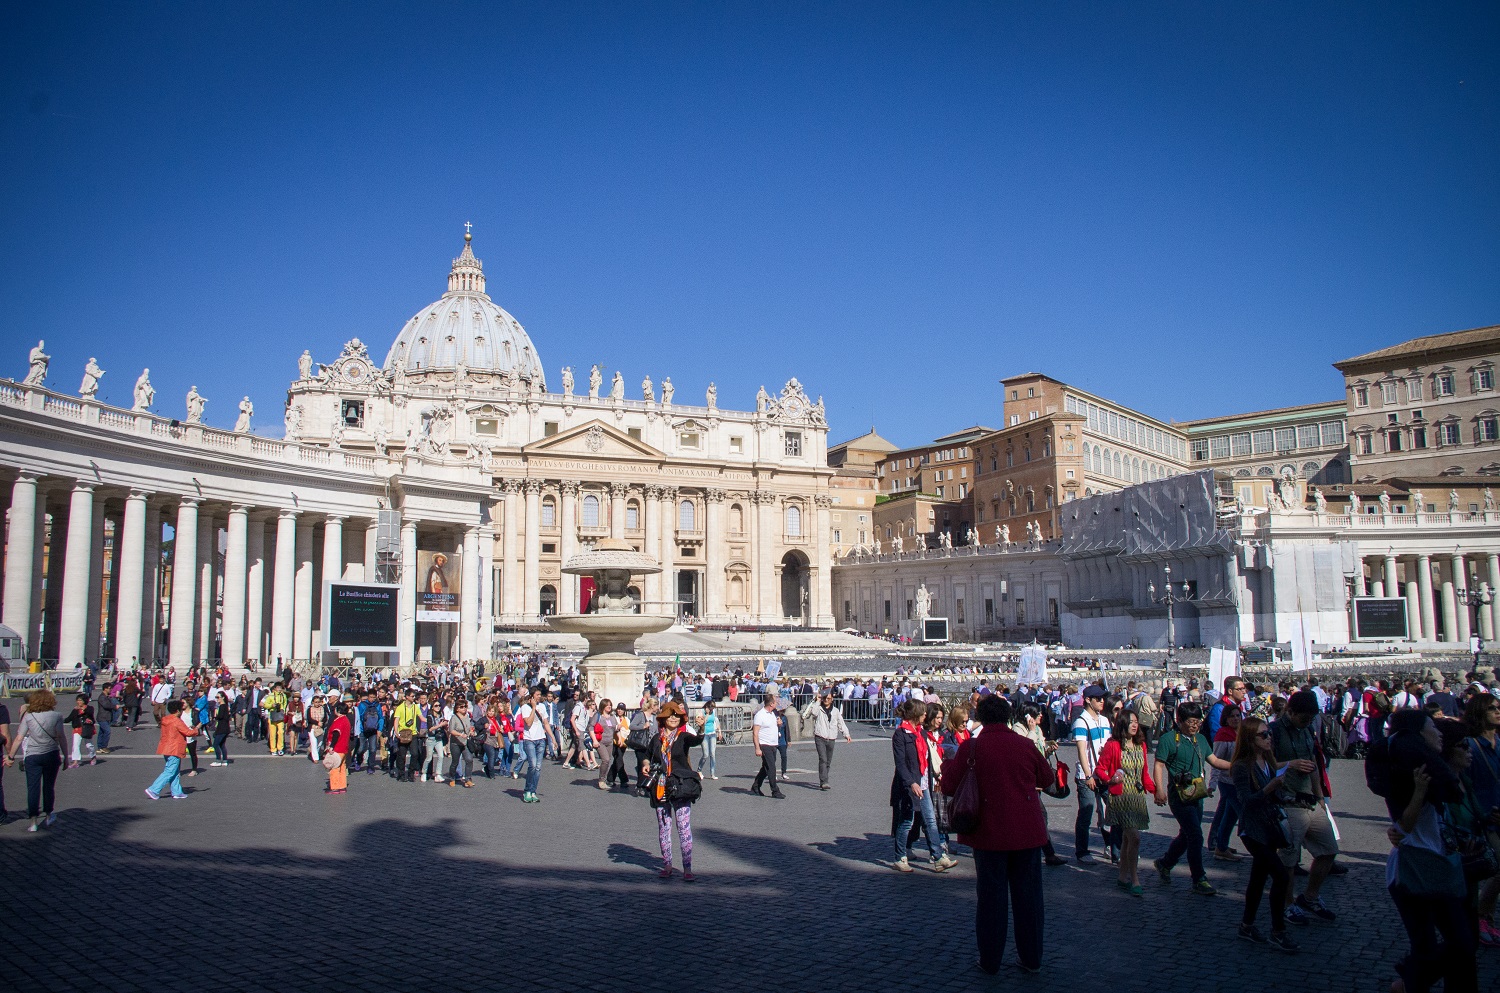 The Vatican with crowds during the day